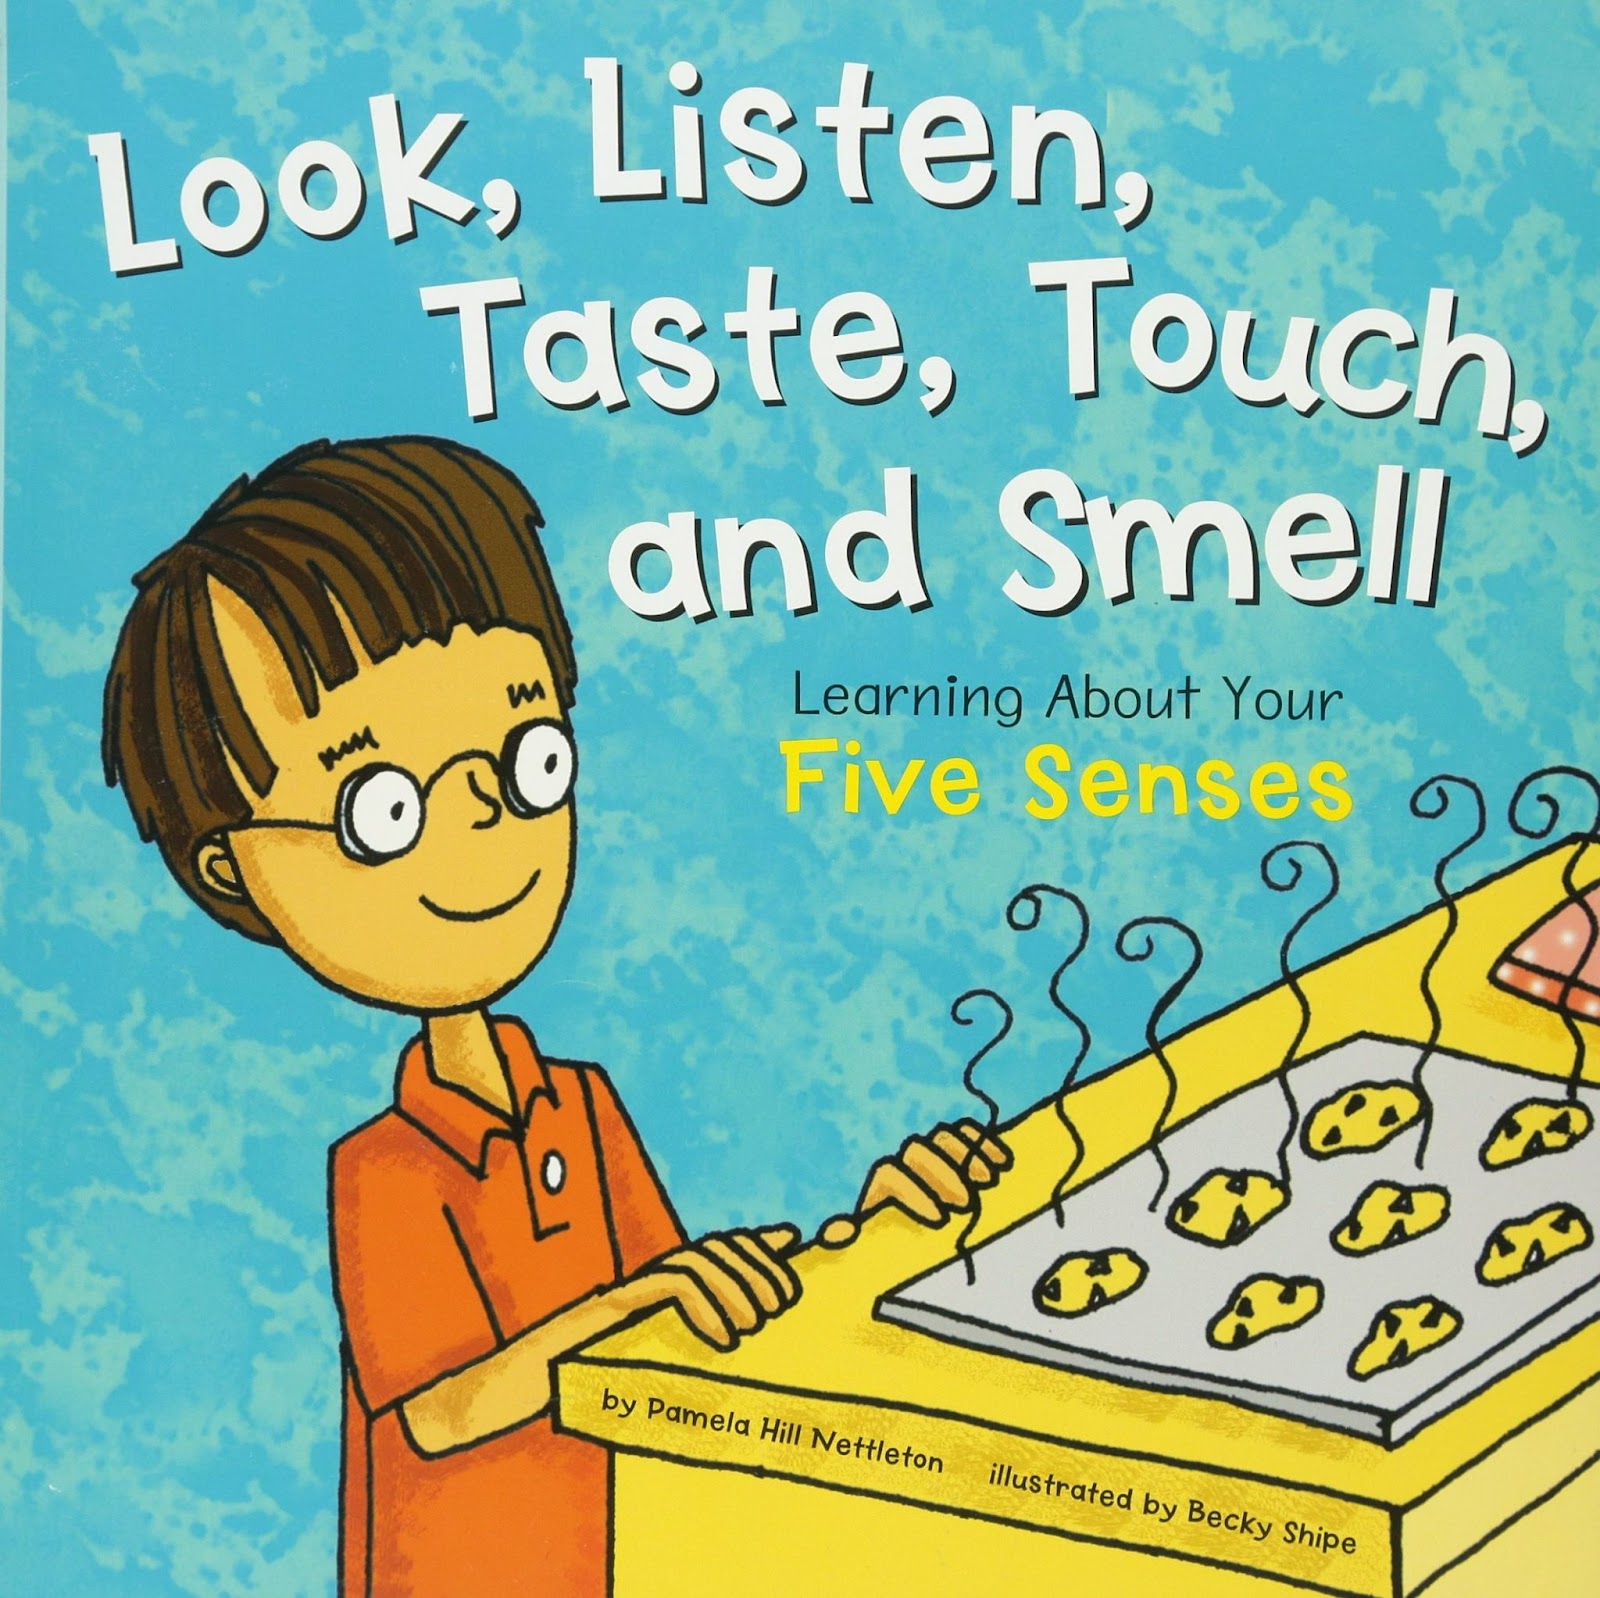 Look, Listen, taste, touch, and smell